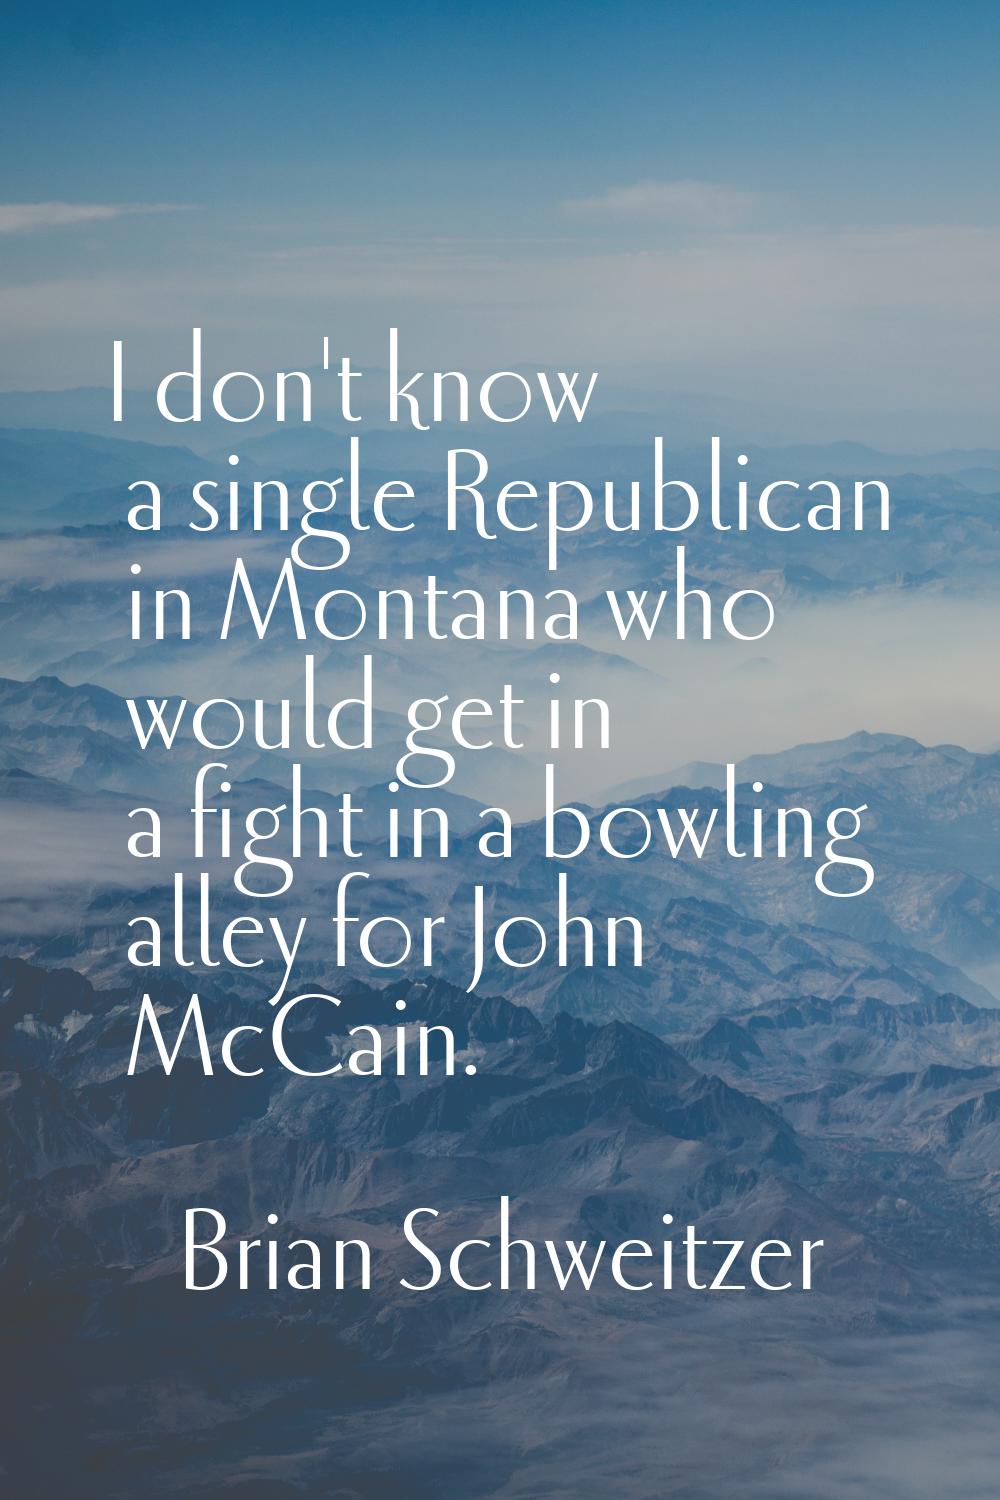 I don't know a single Republican in Montana who would get in a fight in a bowling alley for John Mc